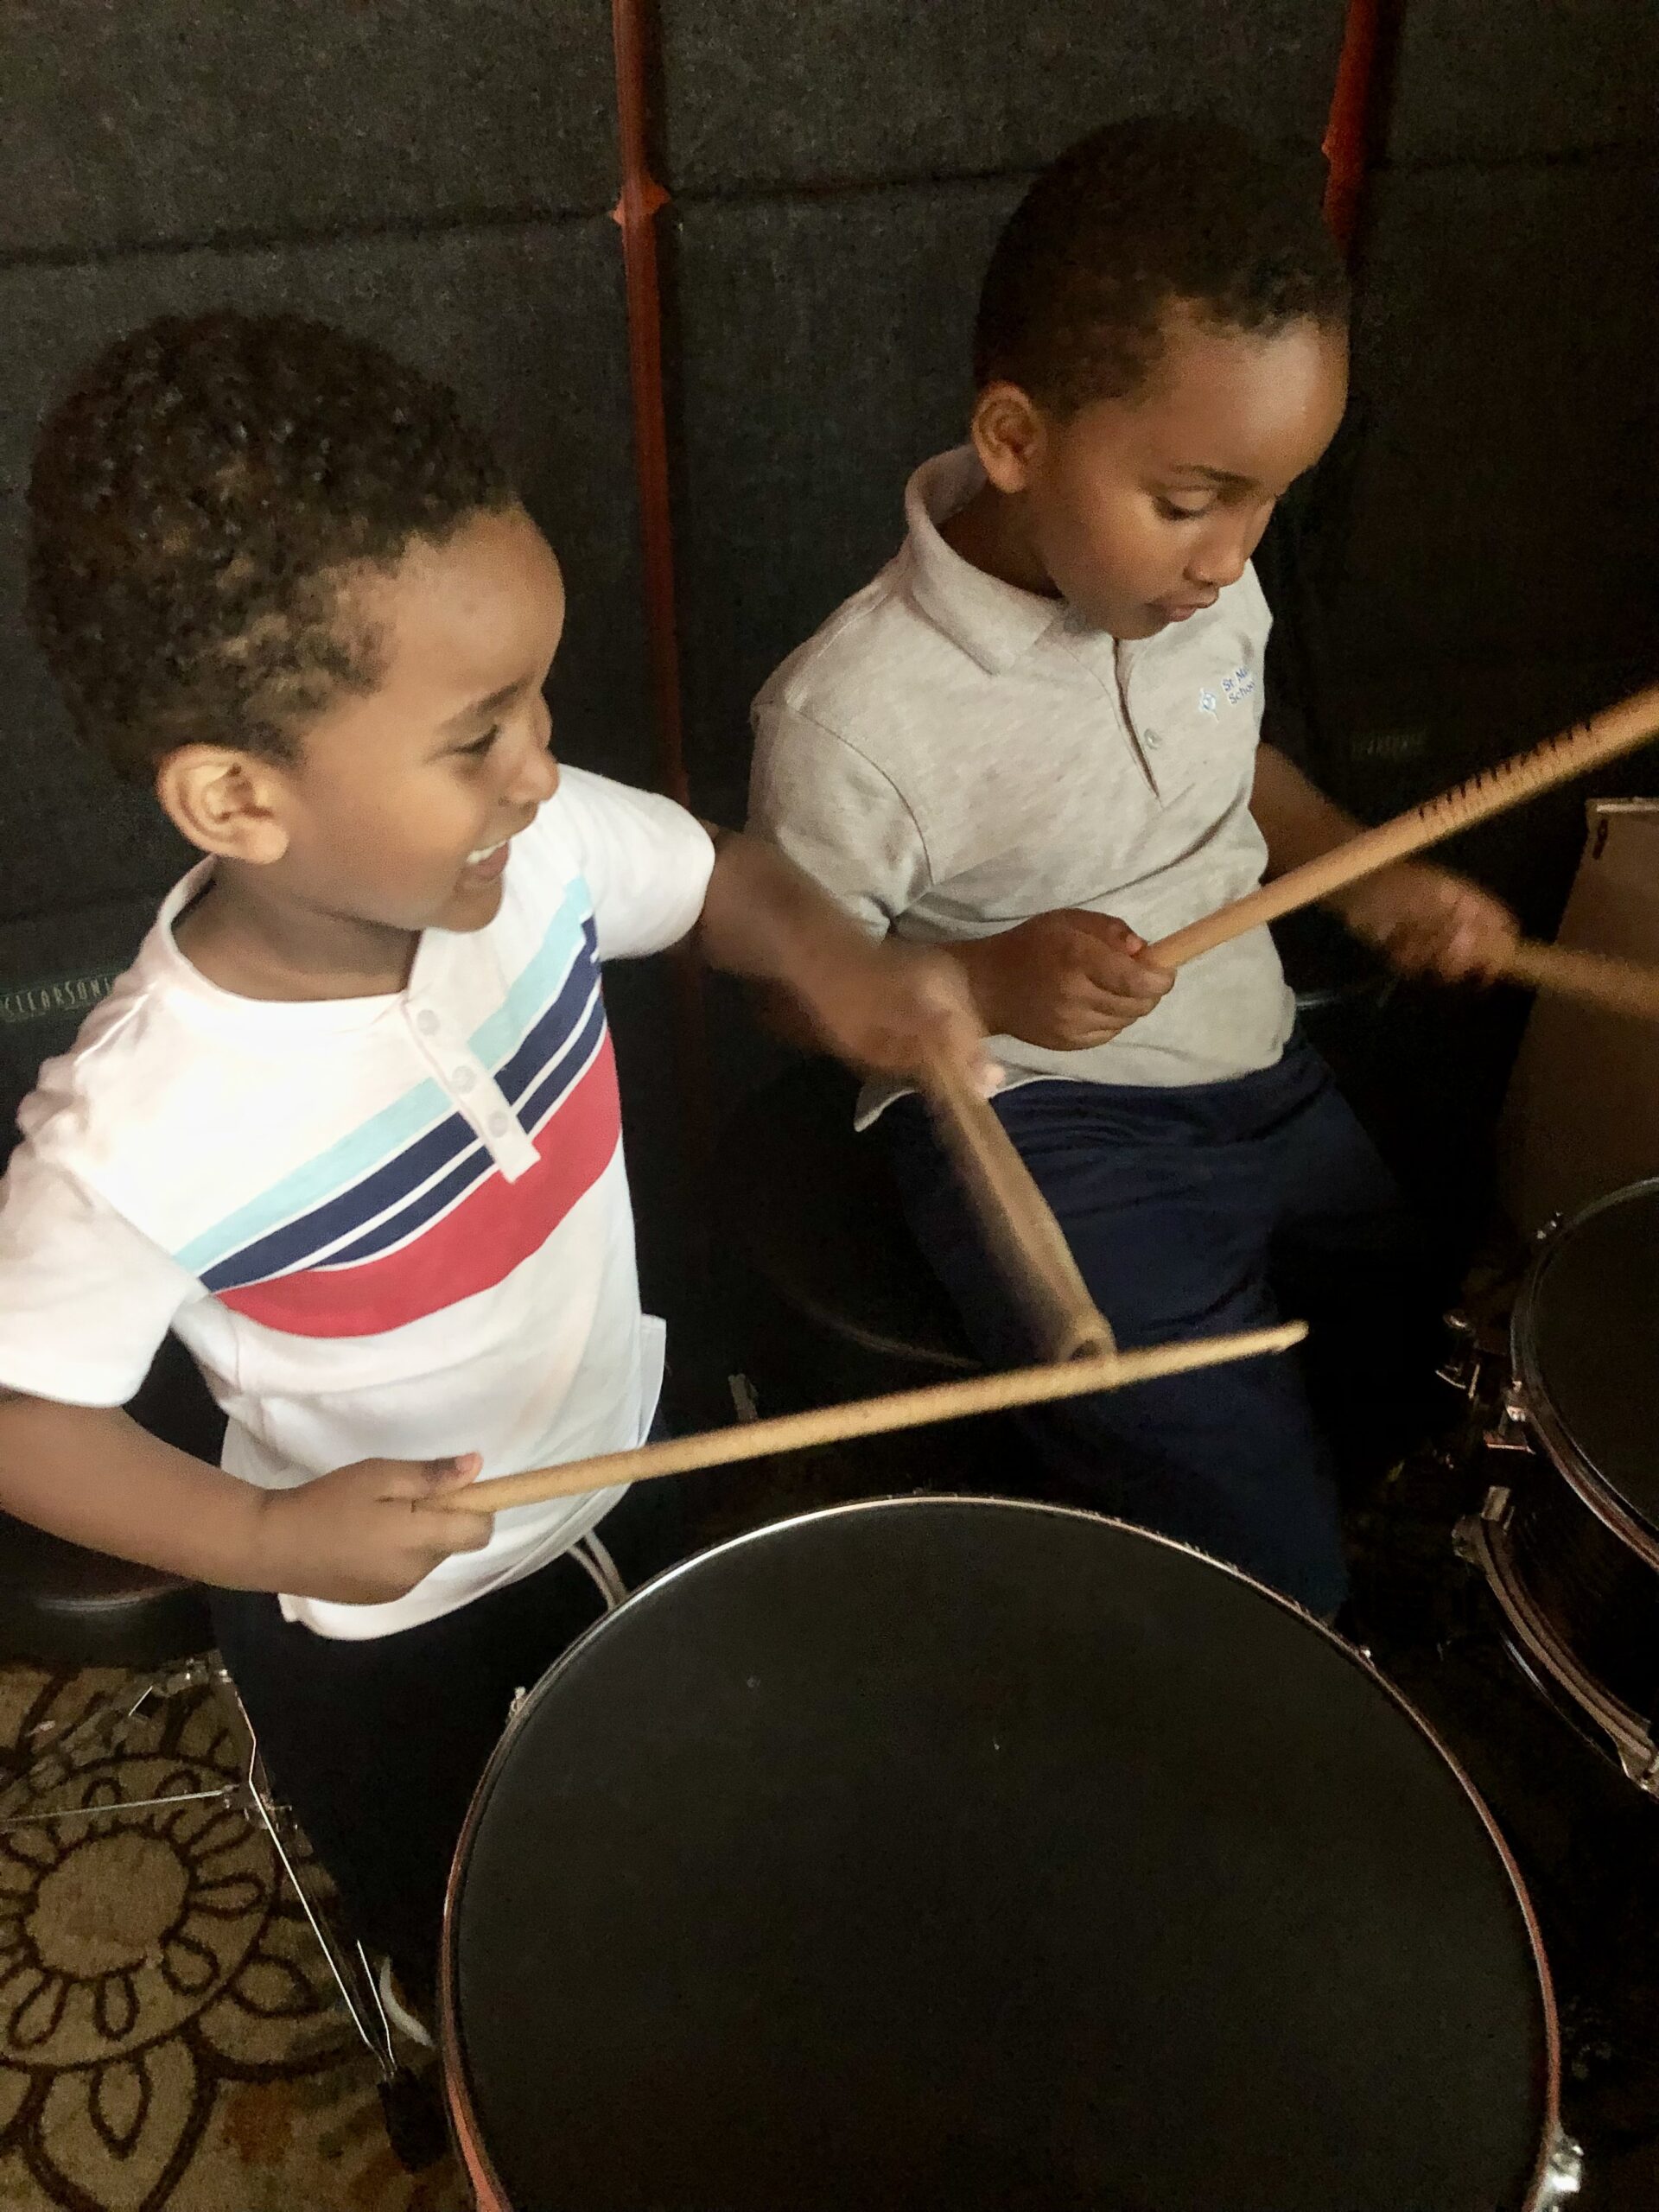 Two children holding drumsticks learning to drum.